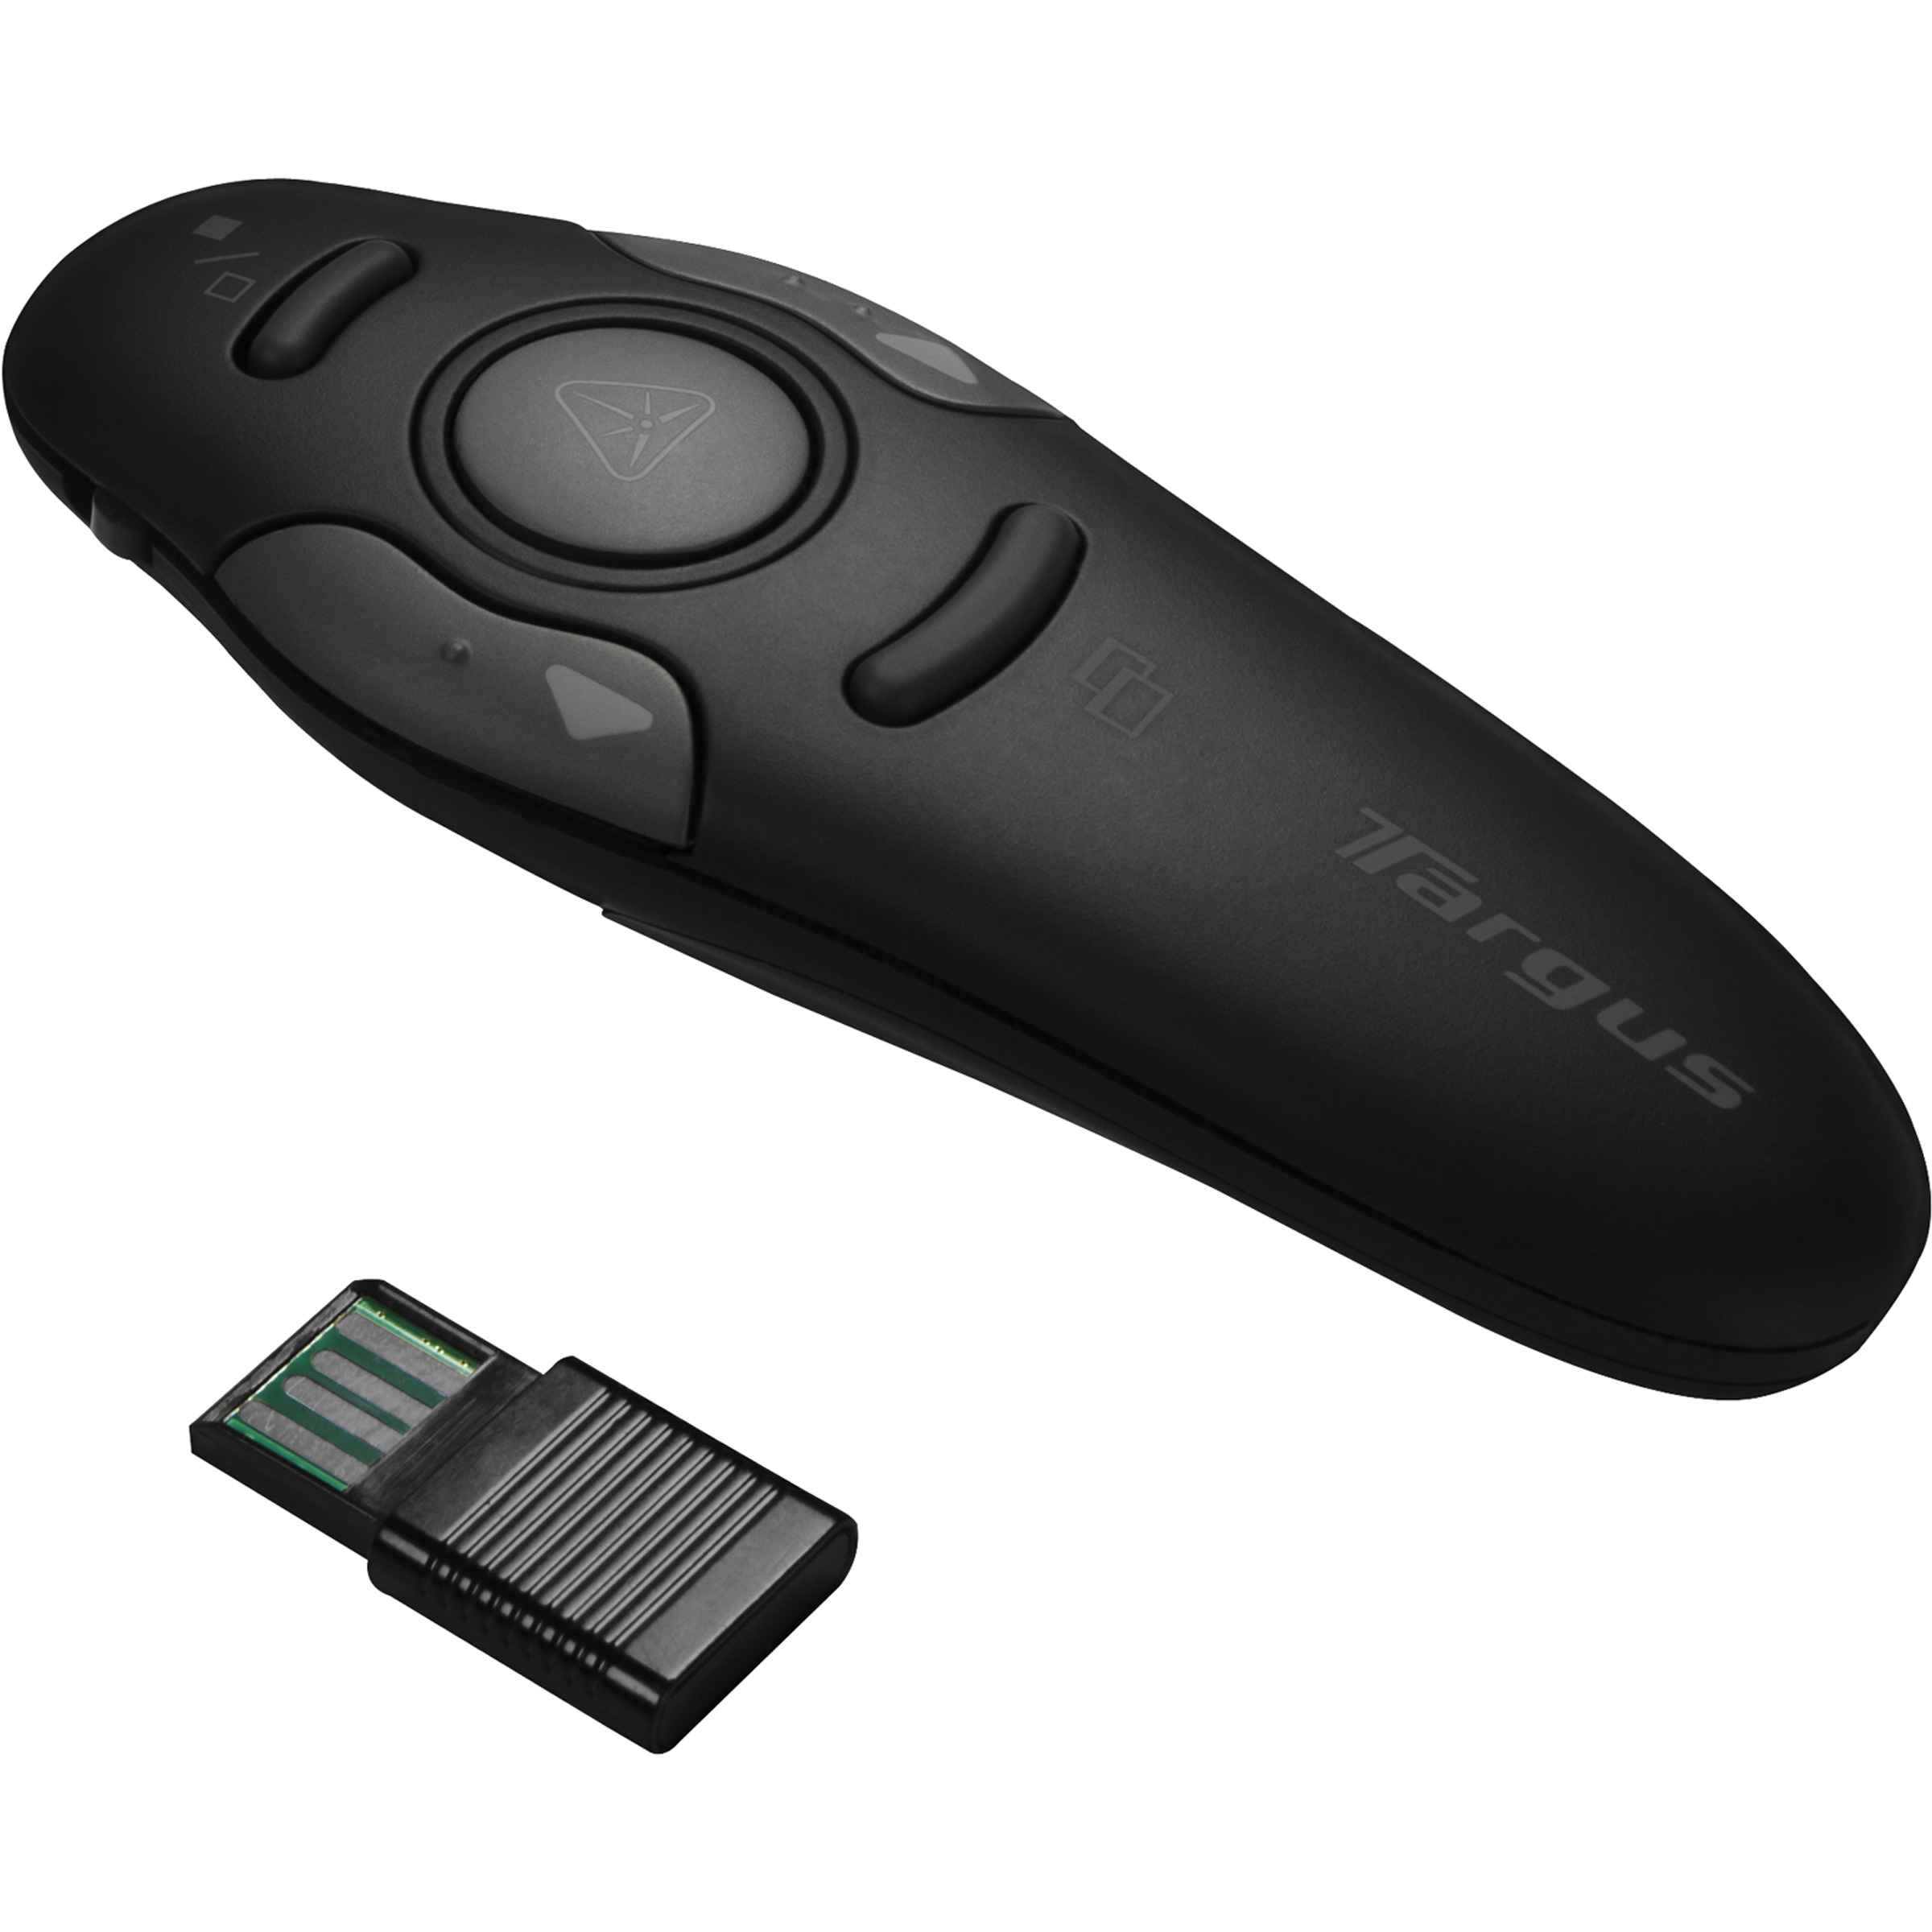 Targus Wireless Presenter With Laser Pointer in Black - AMP16US - image 1 of 10